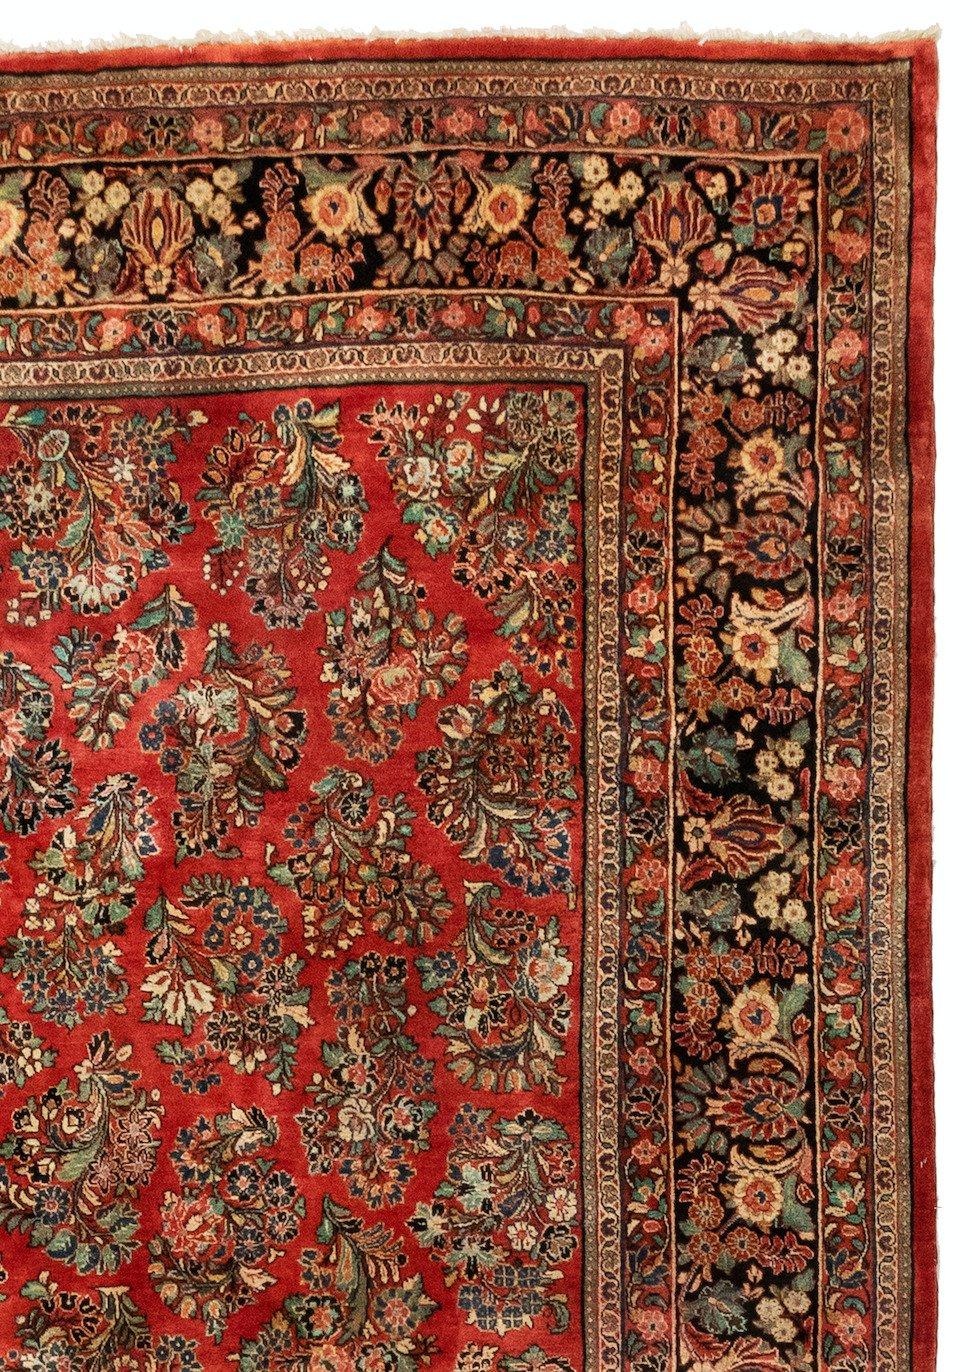 Sarouk Farahan Large Antique Vintage Persian Red and Gold Floral Sarouk Rug, circa 1920s For Sale